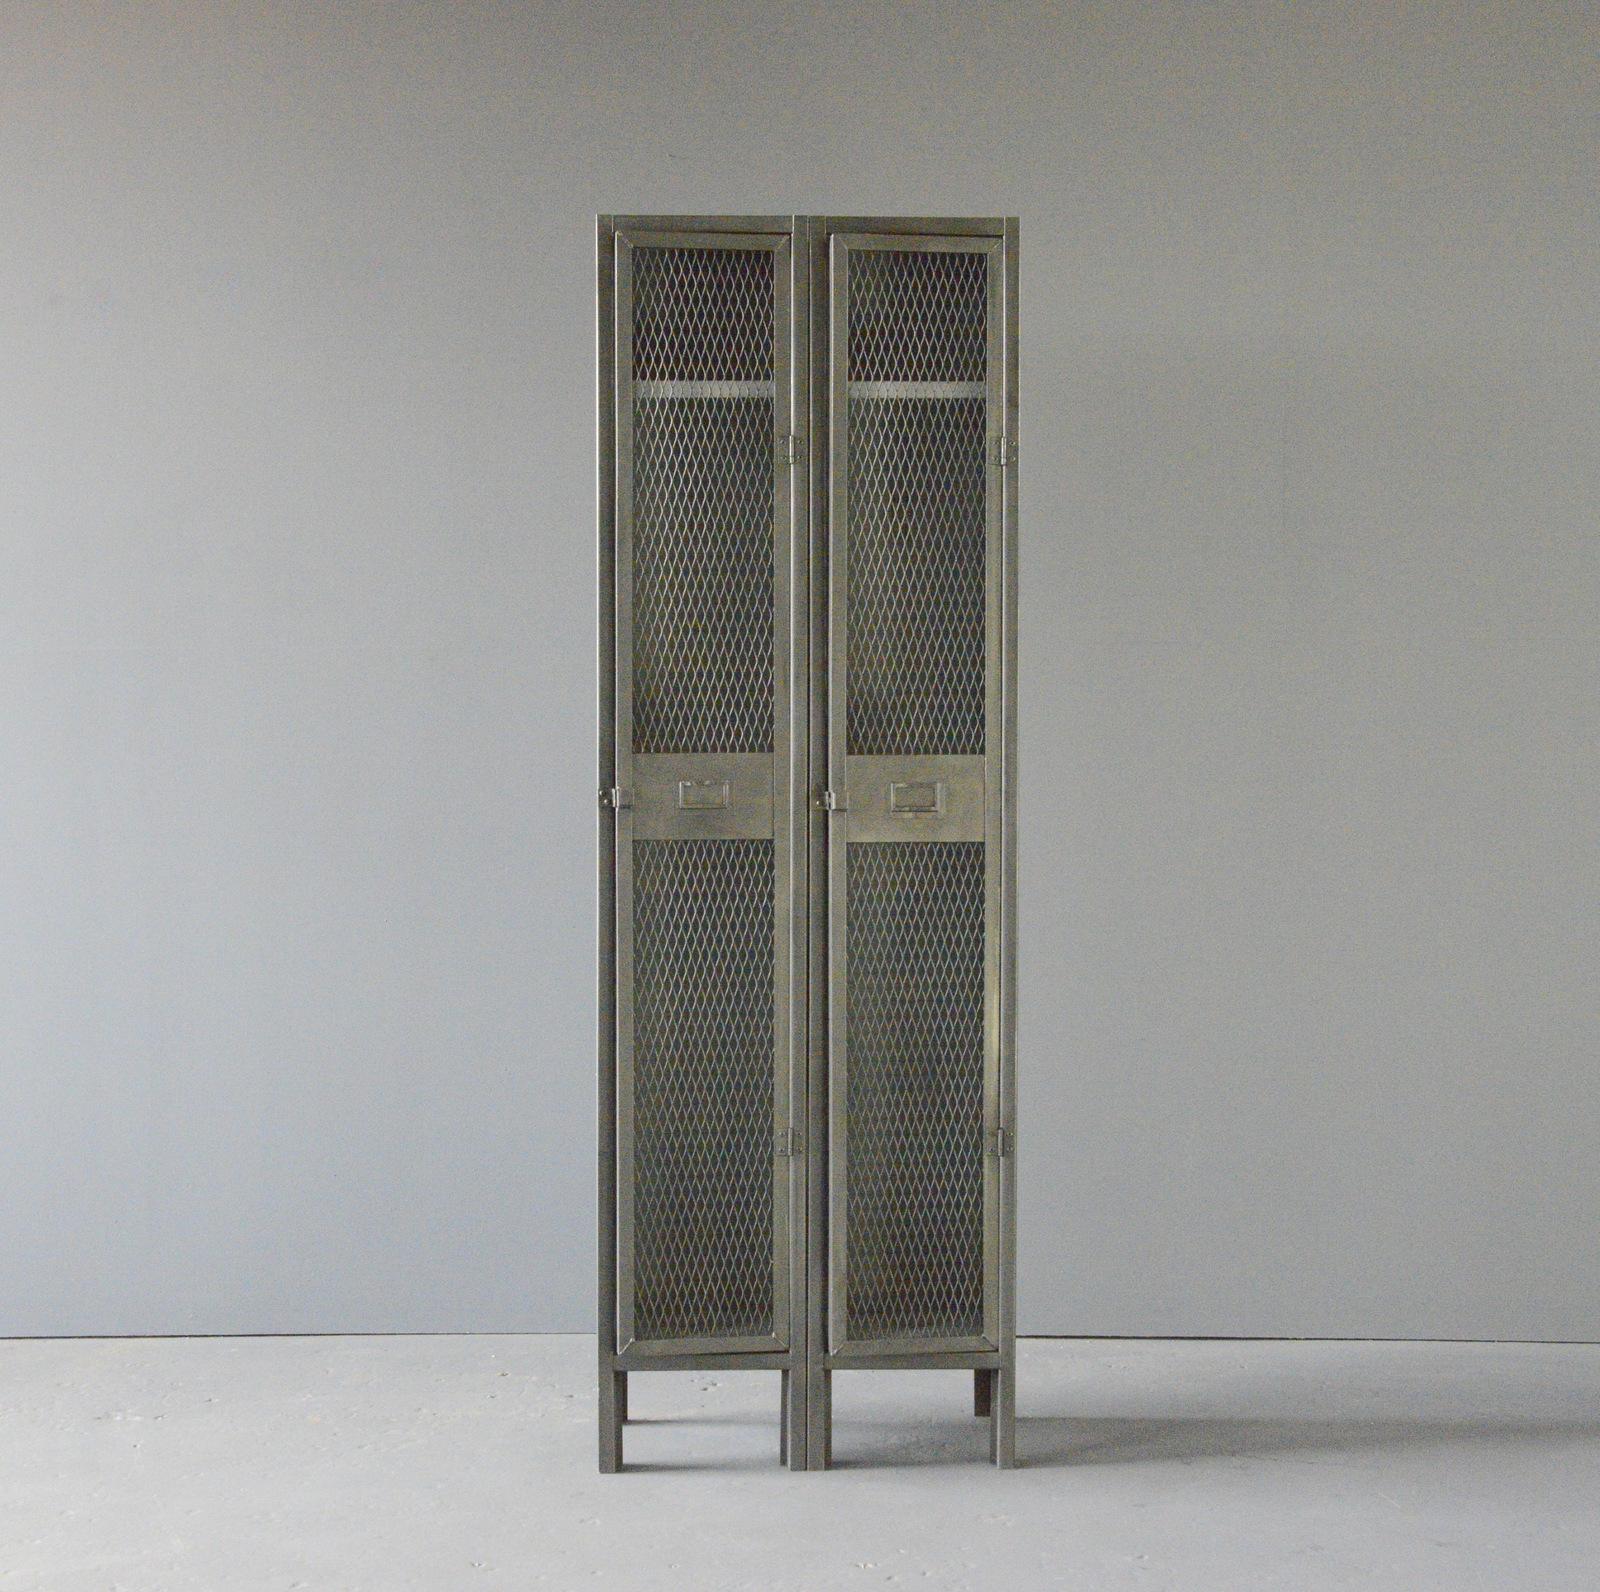 English Industrial Lockers circa 1940s

- Sheet steel with mesh front doors
- 2 Doors
- Each compartment has hanging hooks and shelf
- Salvaged from an engineering works in Birmingham
- English ~ 1940s
- 61cm wide x 31cm deep x 182cm